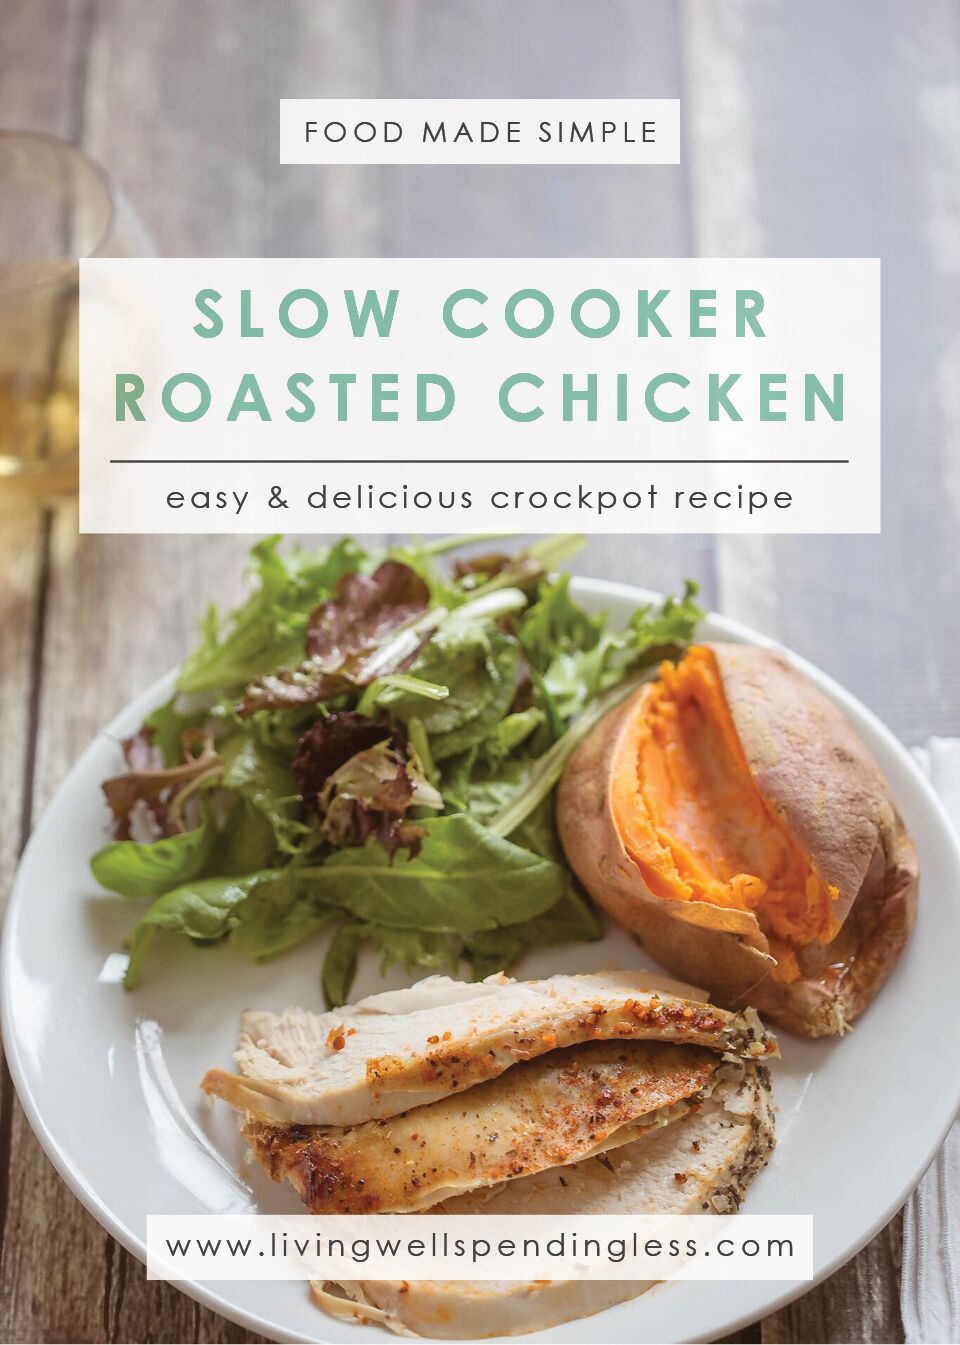 Slow cooker roasted Chicken | Easy Chicken Recipe | Chicken Meal | Herb Chicken | Meal Planning | Main Course Menu | Food Made Simple